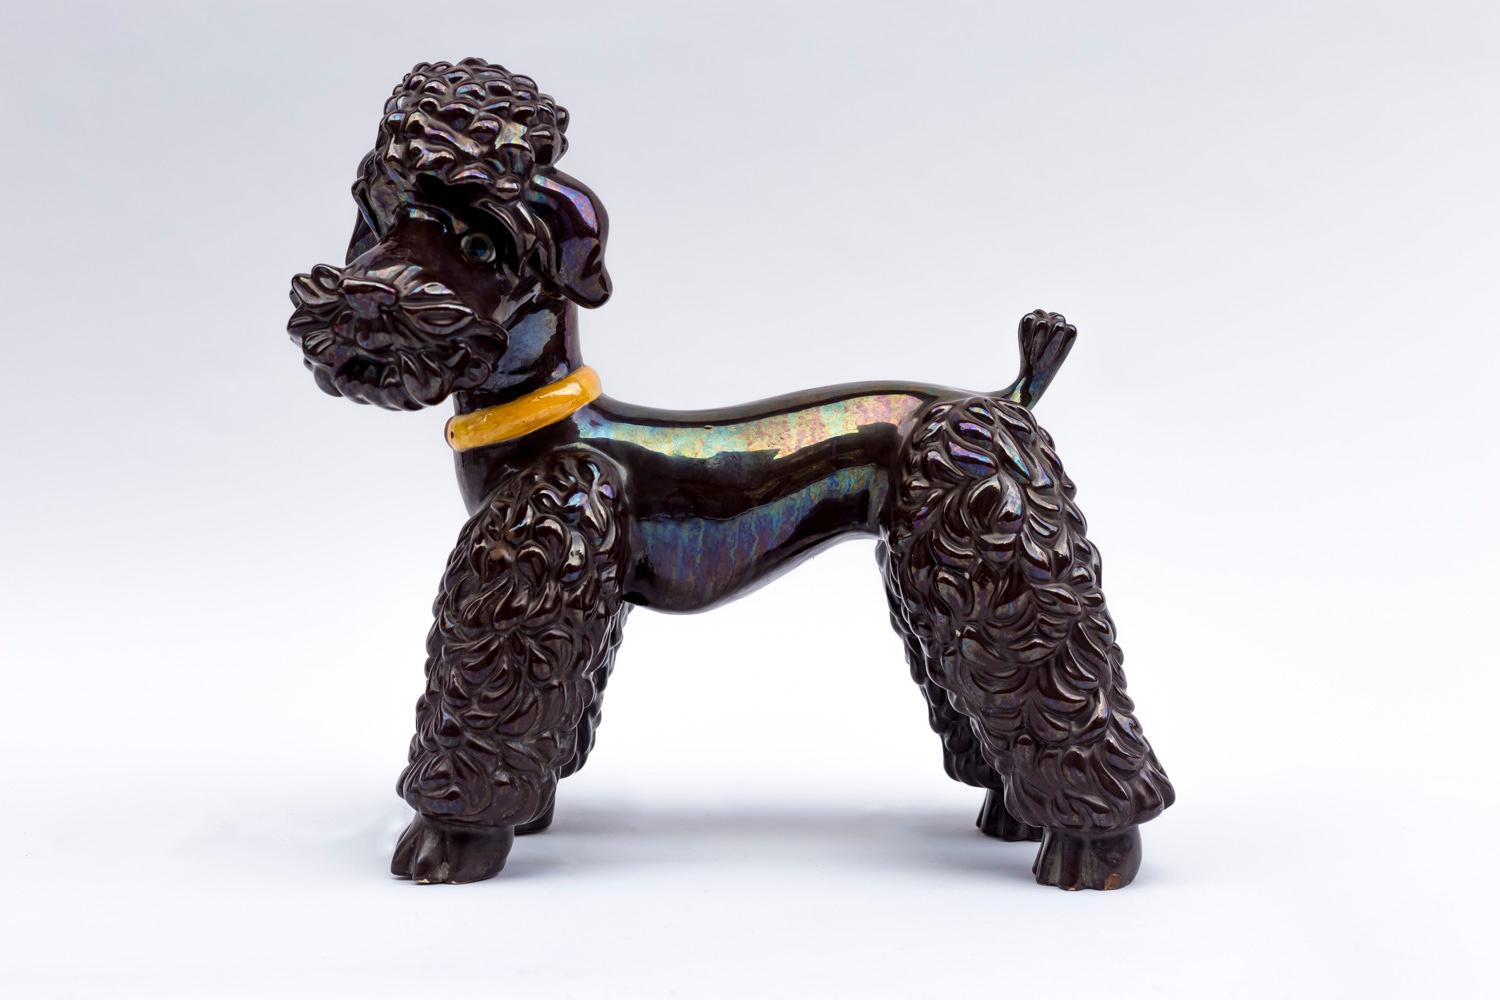 Iridescent brown earthenware sculpture figuring a groomed poodle with short coat on its body and curly long hair on its paws and head, head turned to left, with a yellow necklace around its neck. Its eyes are in sulphide. 

Work realized in the